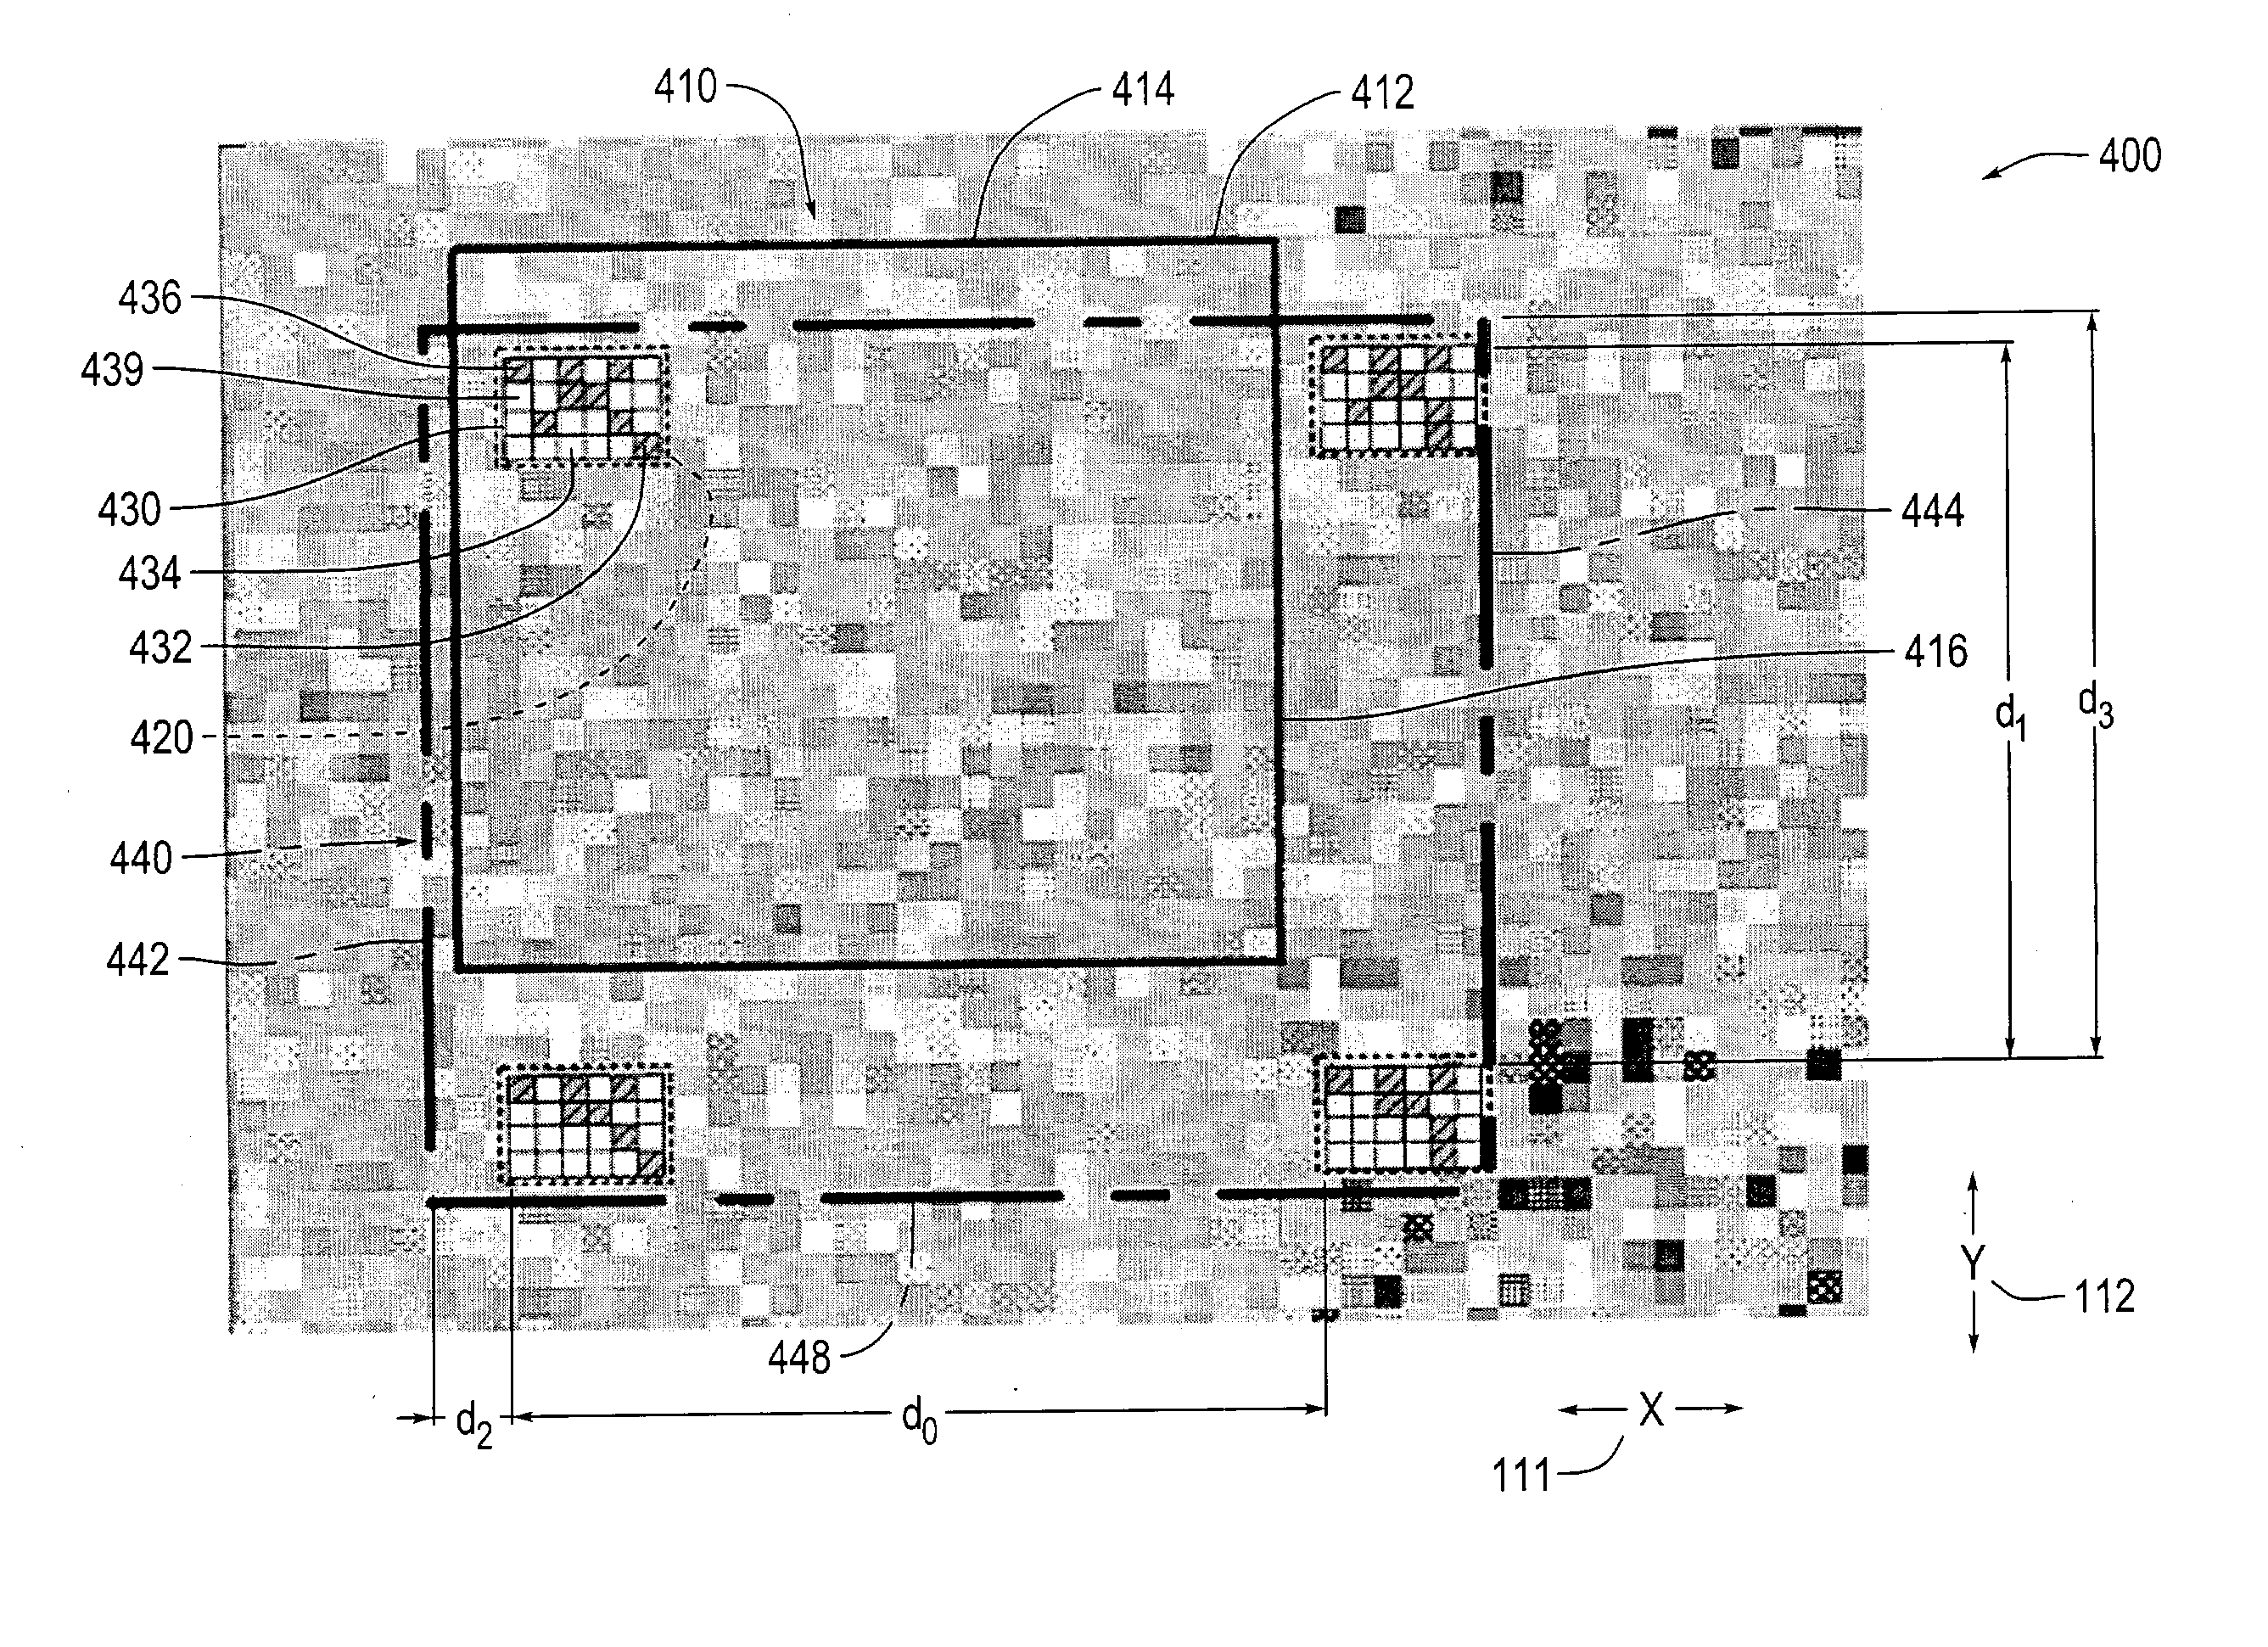 Systems and methods for absolute positioning using repeated quasi-random pattern